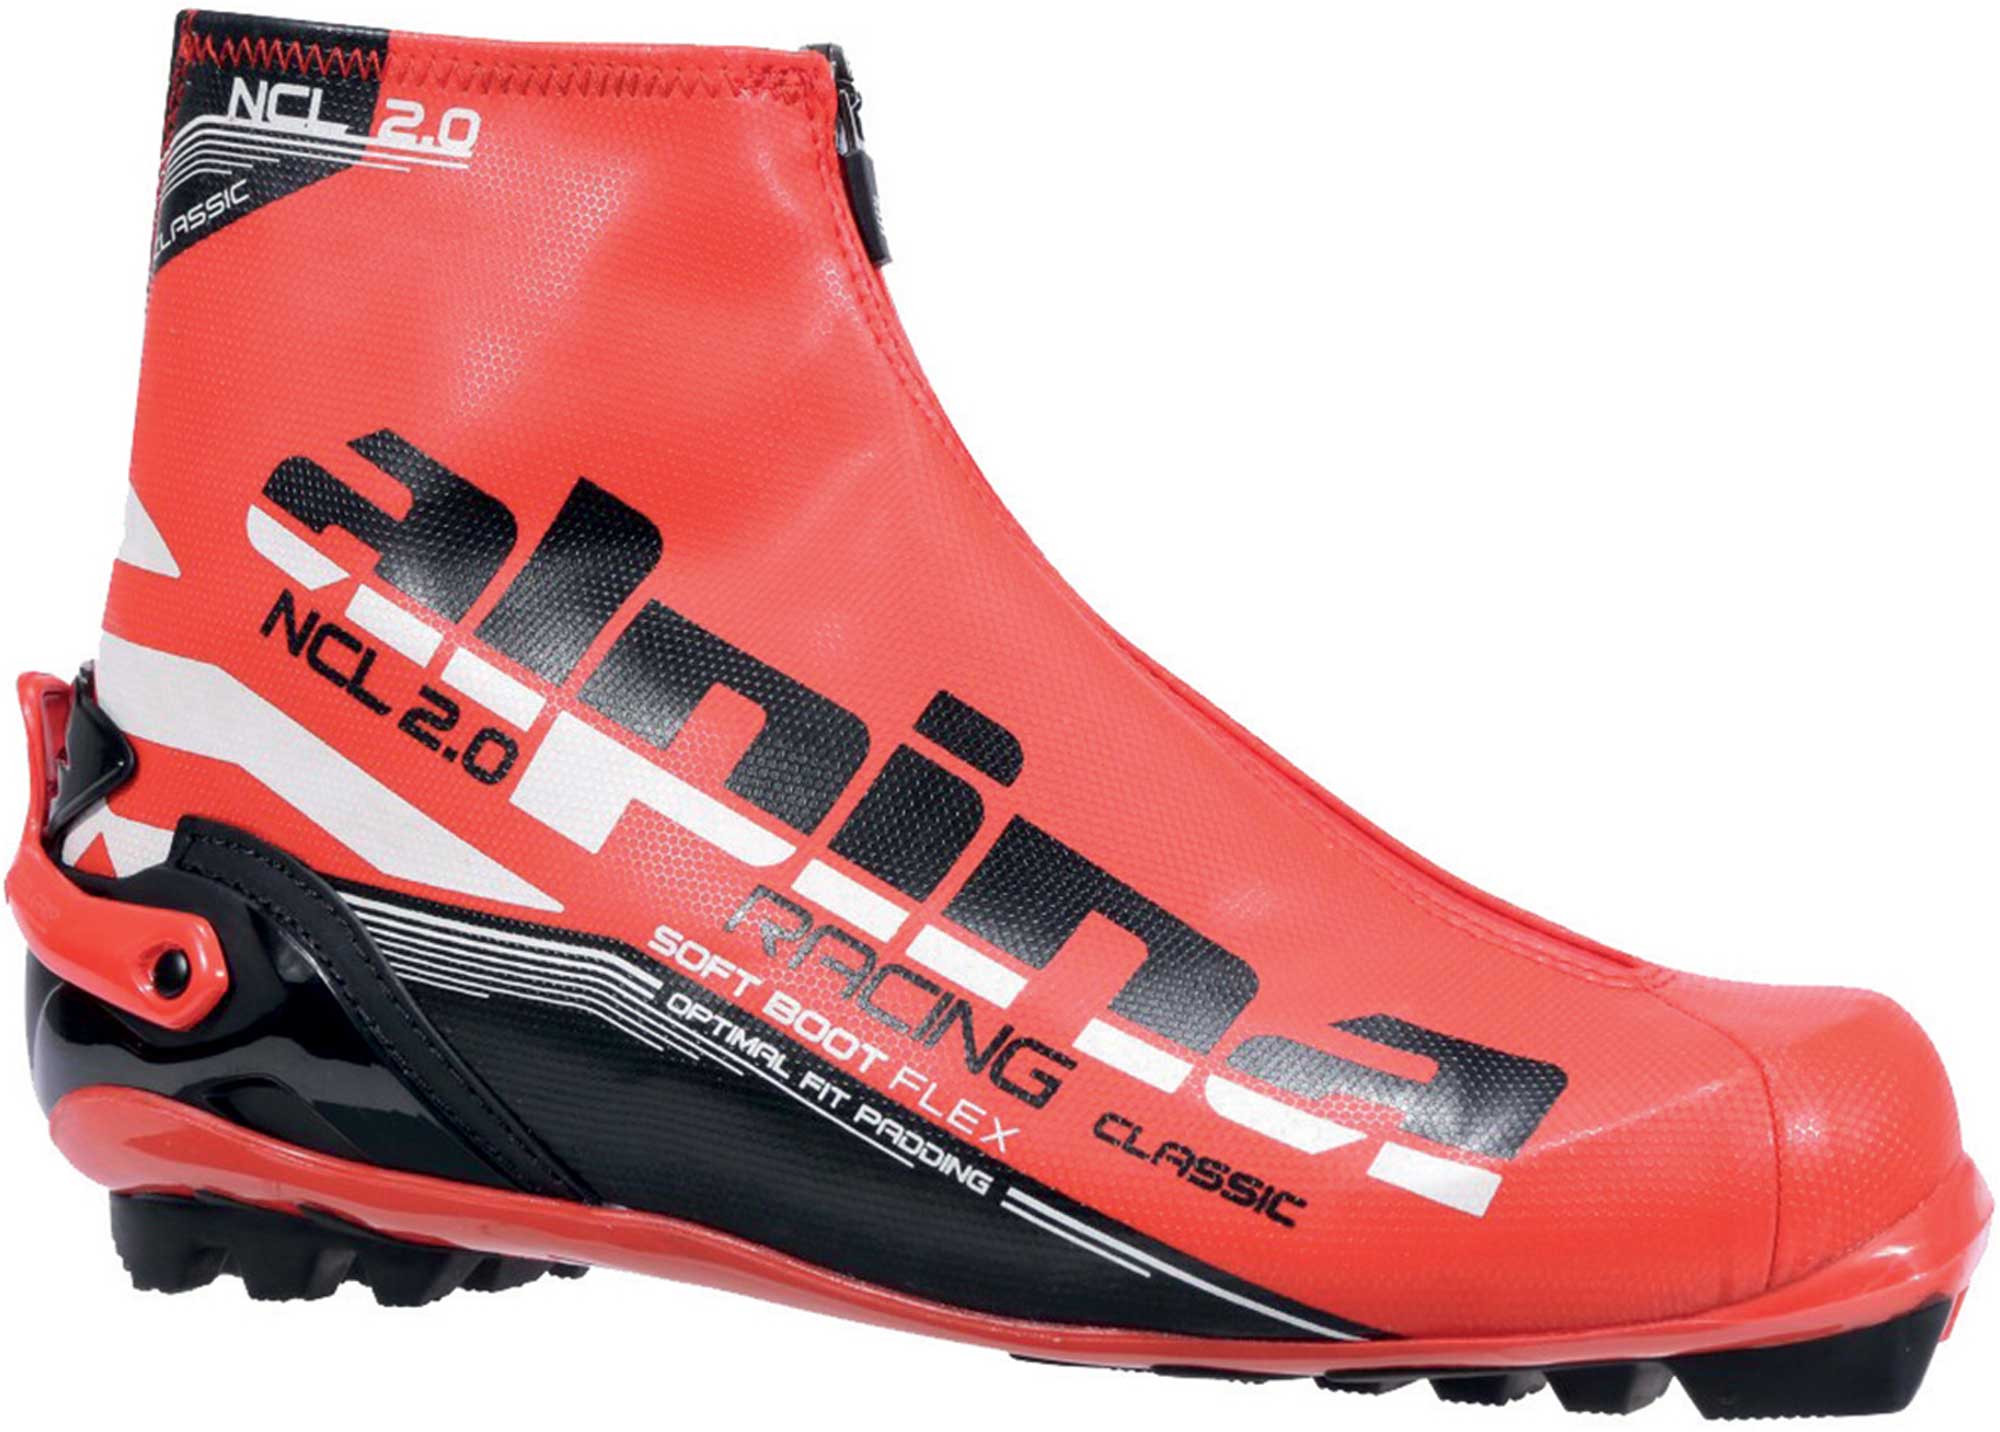 Boots for classic cross-country skiing